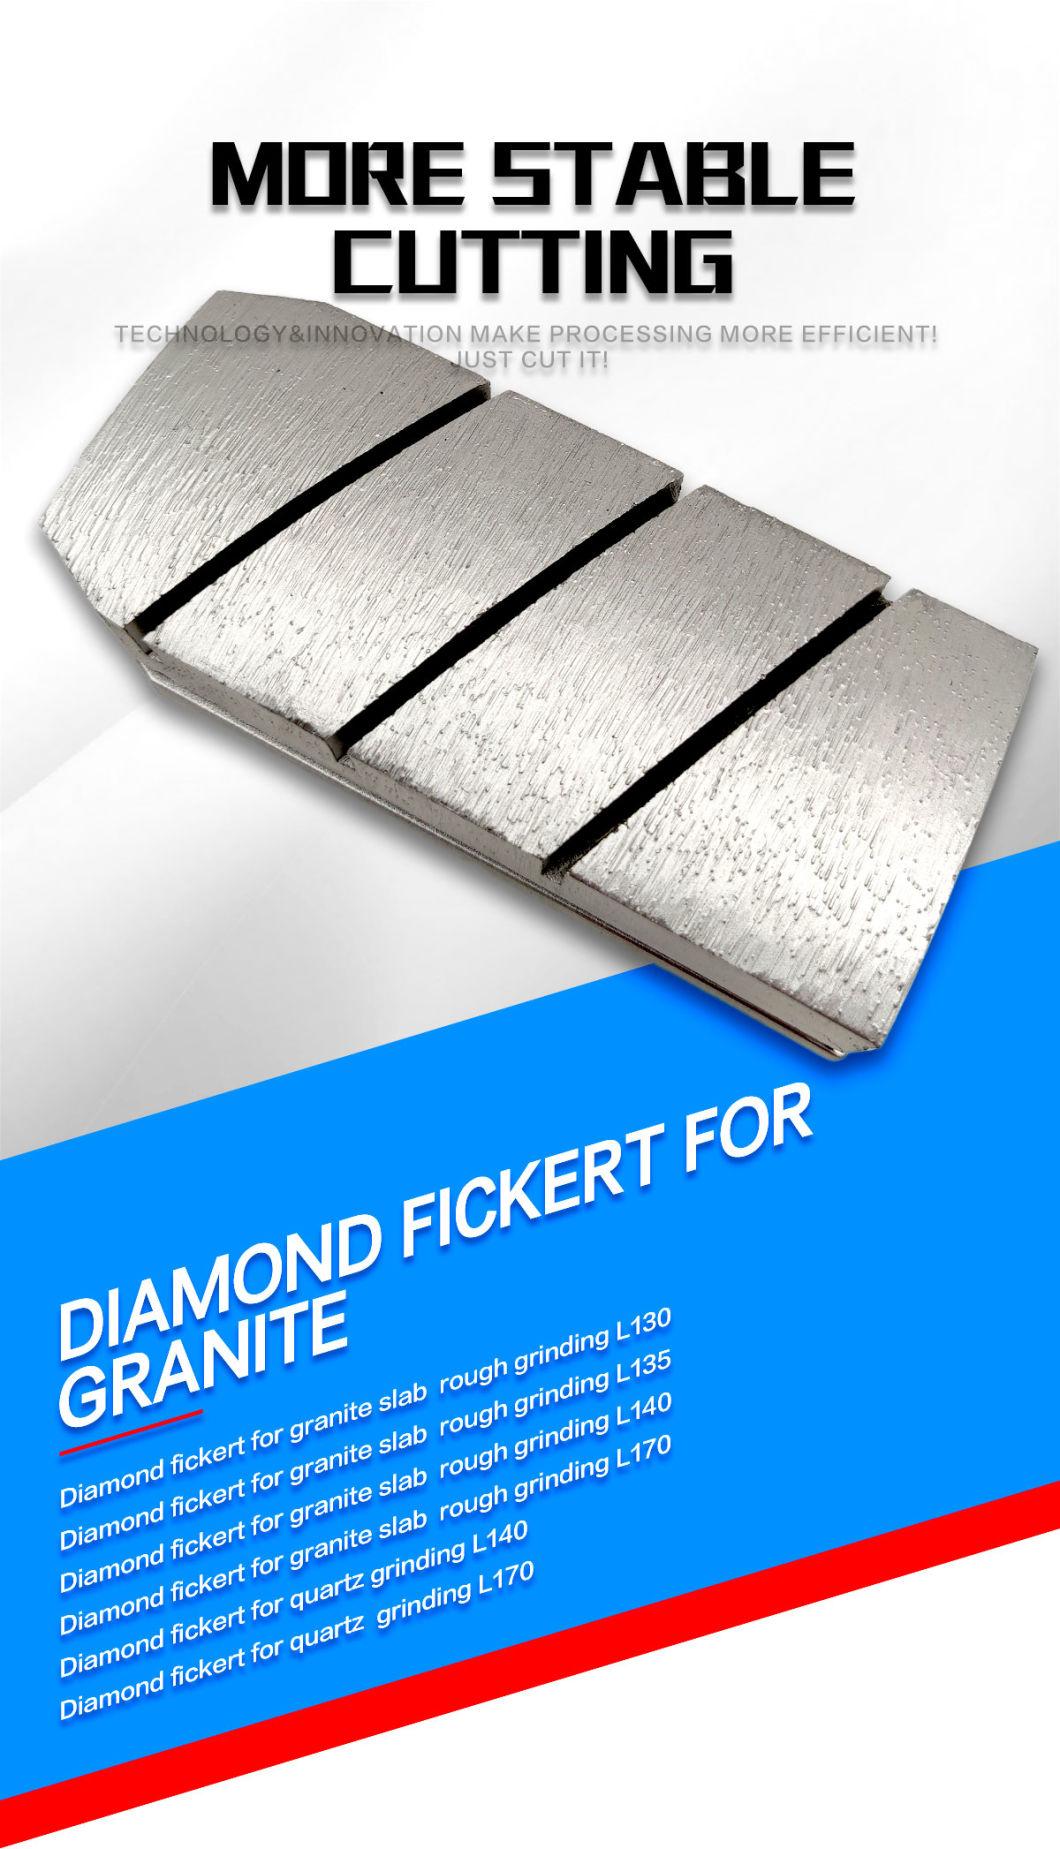 Professional Diamond Fickert for Granite Grinding with Good Sharpness and Little Vibration